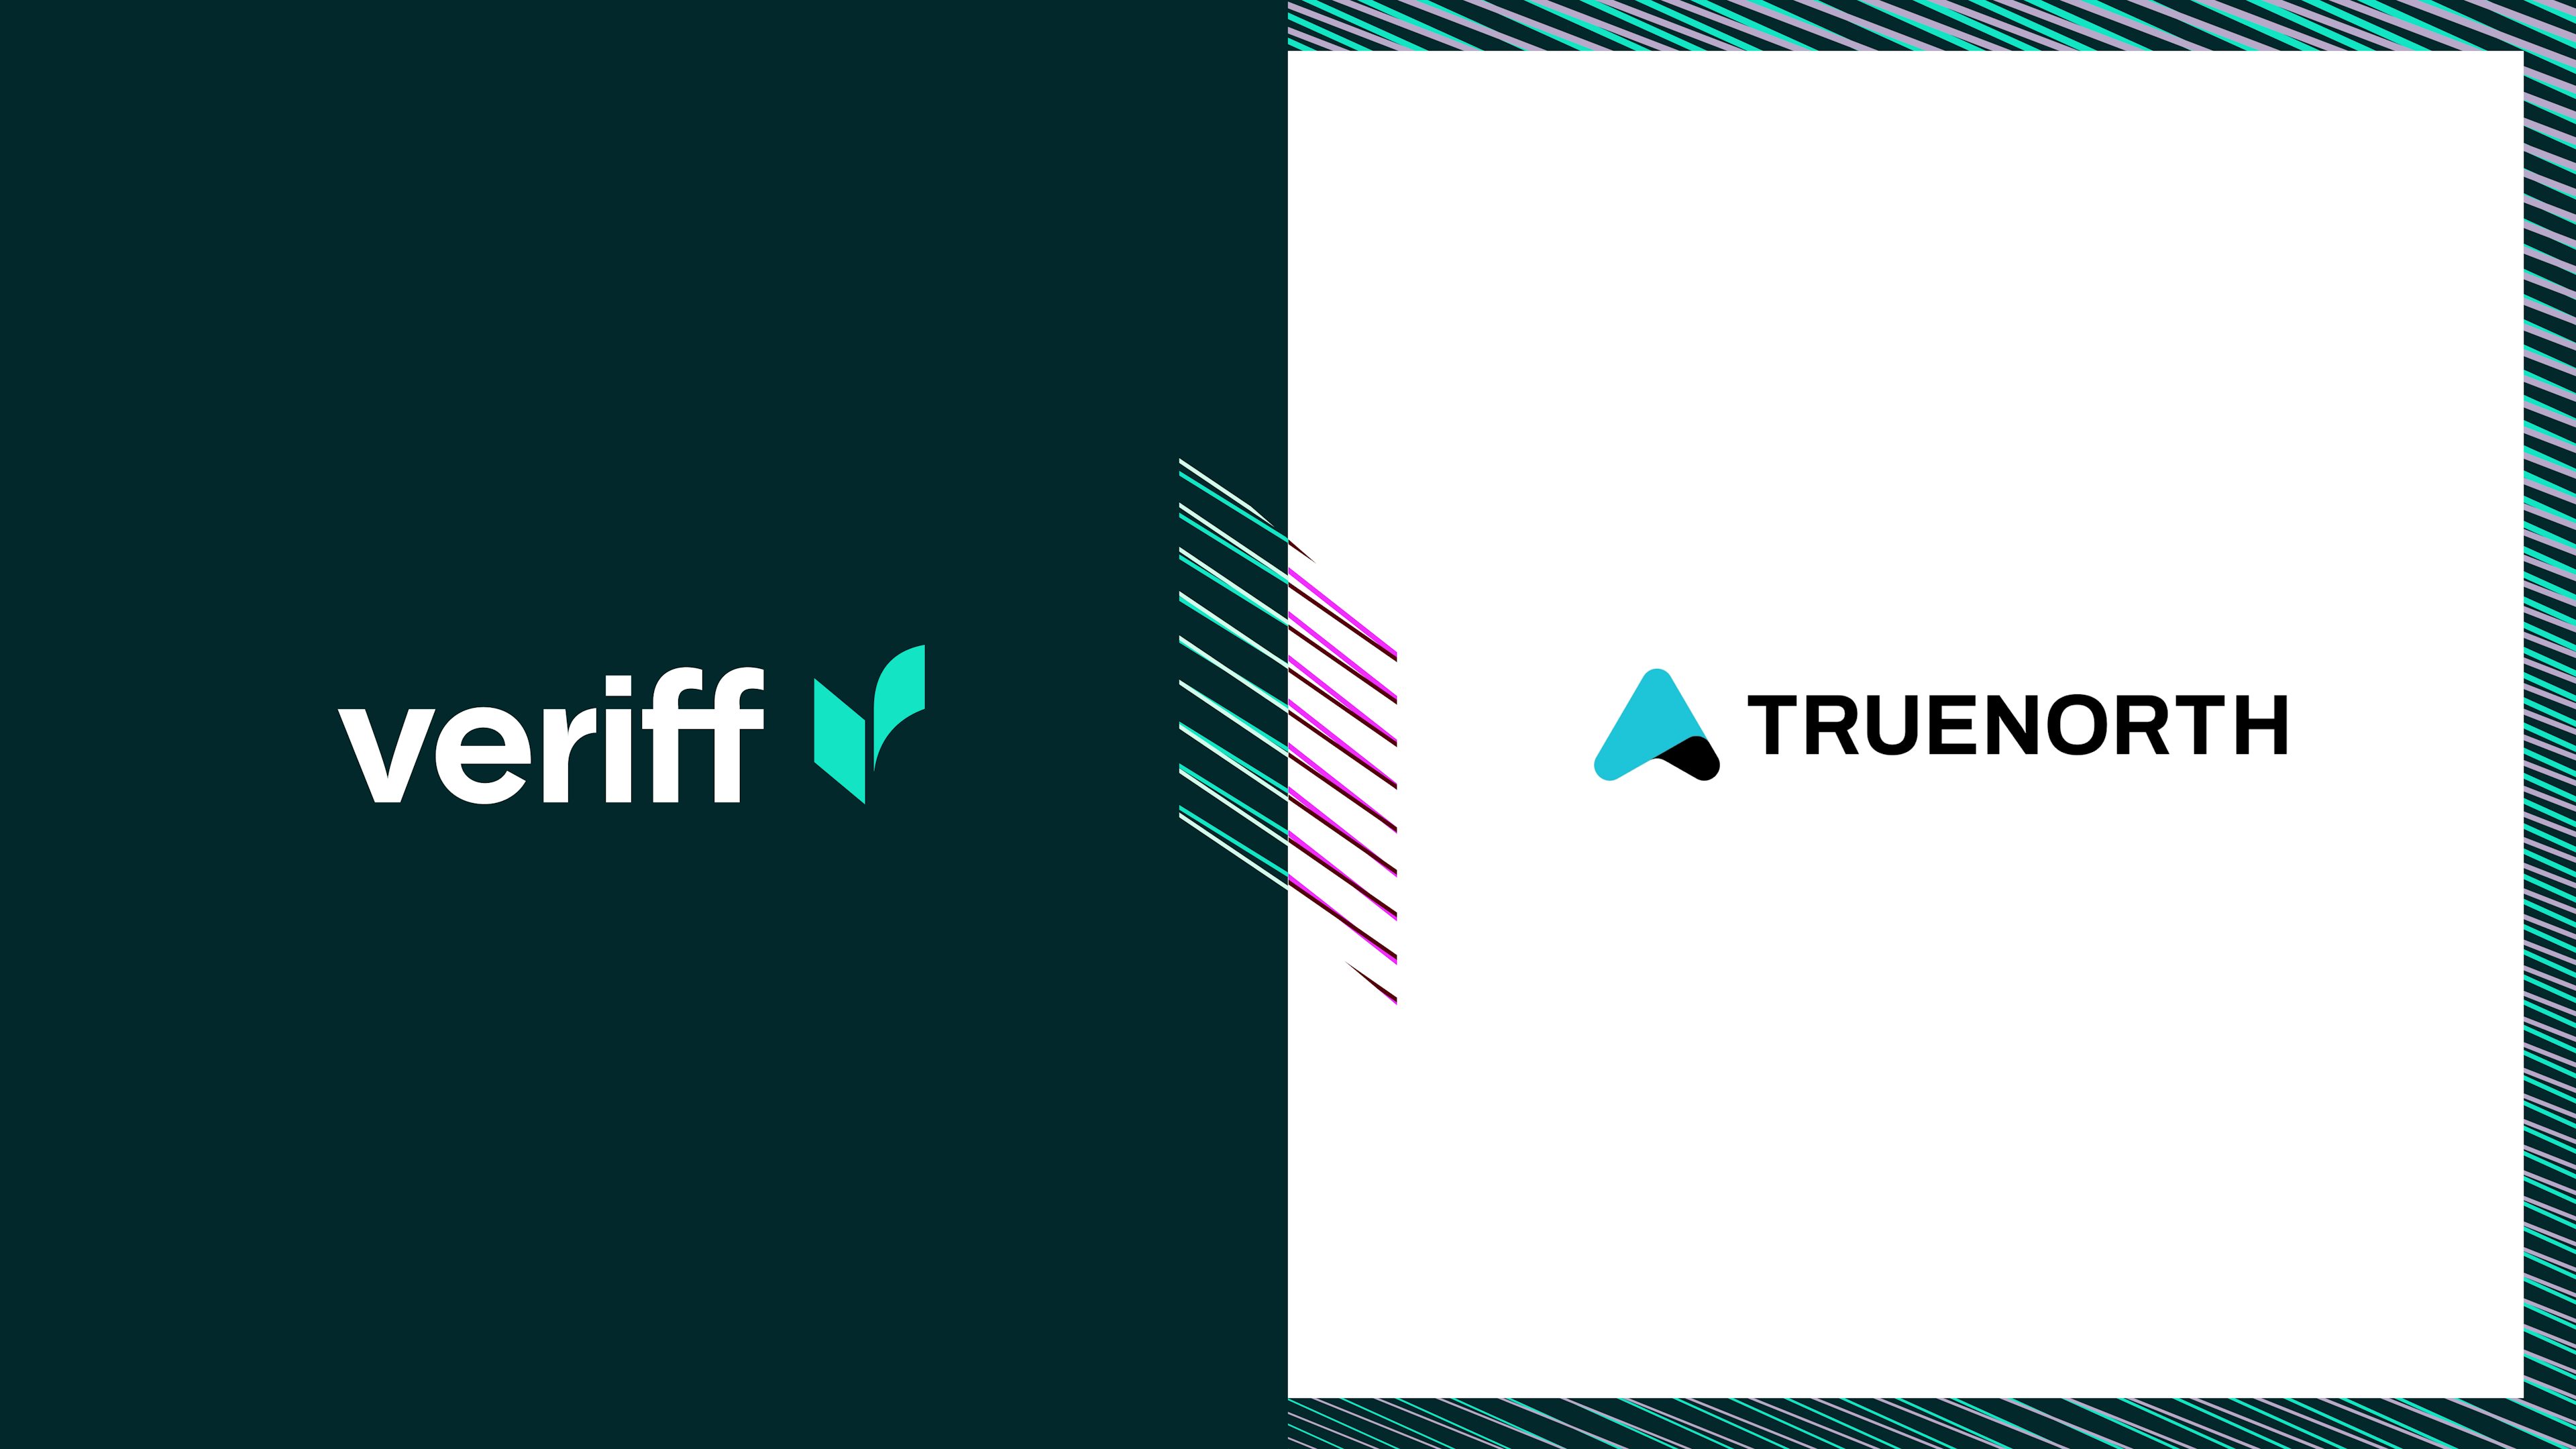 TrueNorth partners with Veriff to power identity verification for digital transformations in financial services